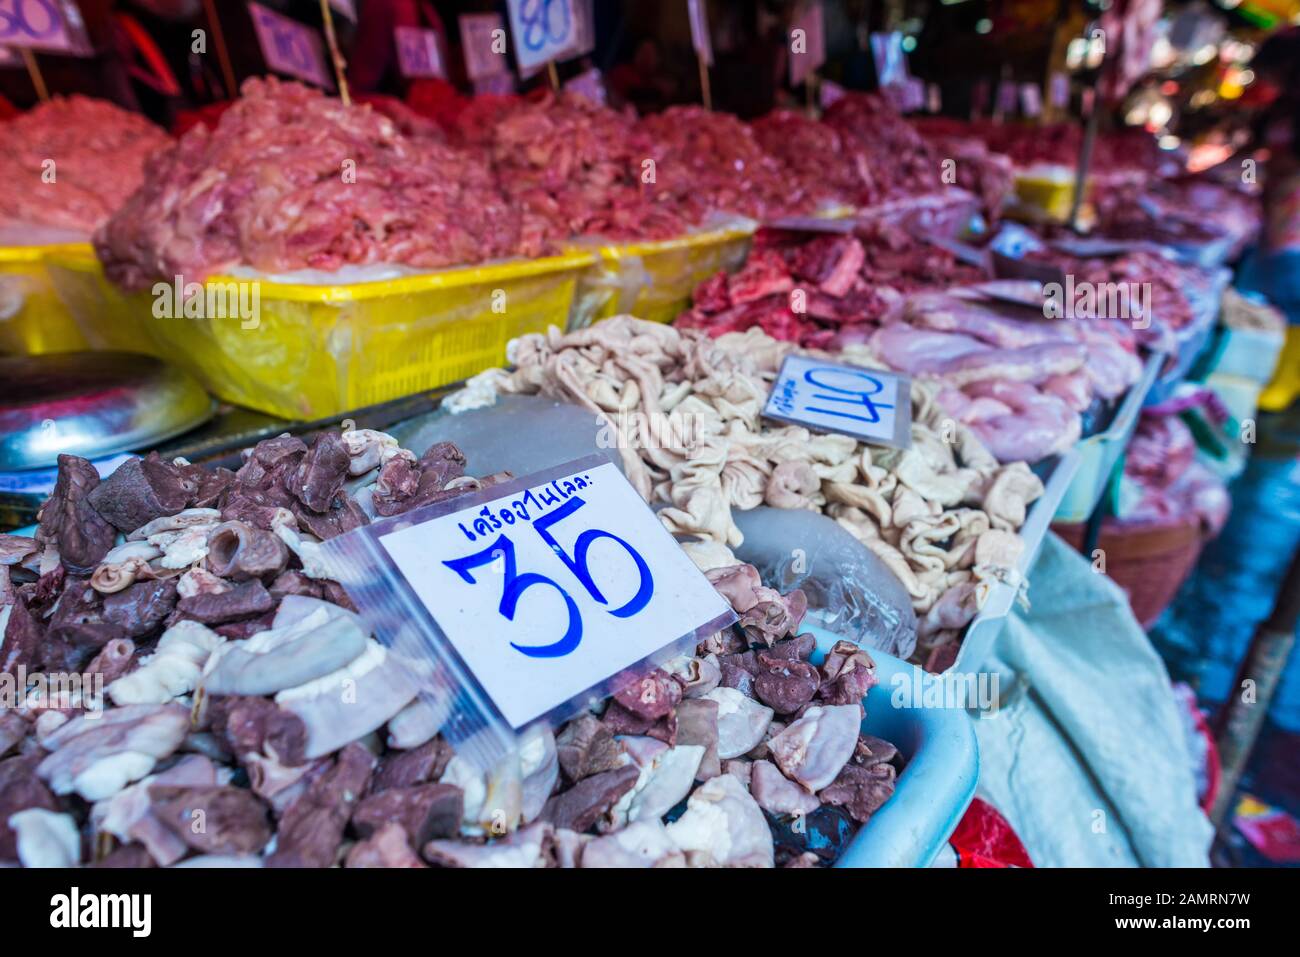 Kholng Toei market Bangkok: Markt stall which sells different cuts of meat including stomach, intestines and other organs in buckets and labeled price Stock Photo